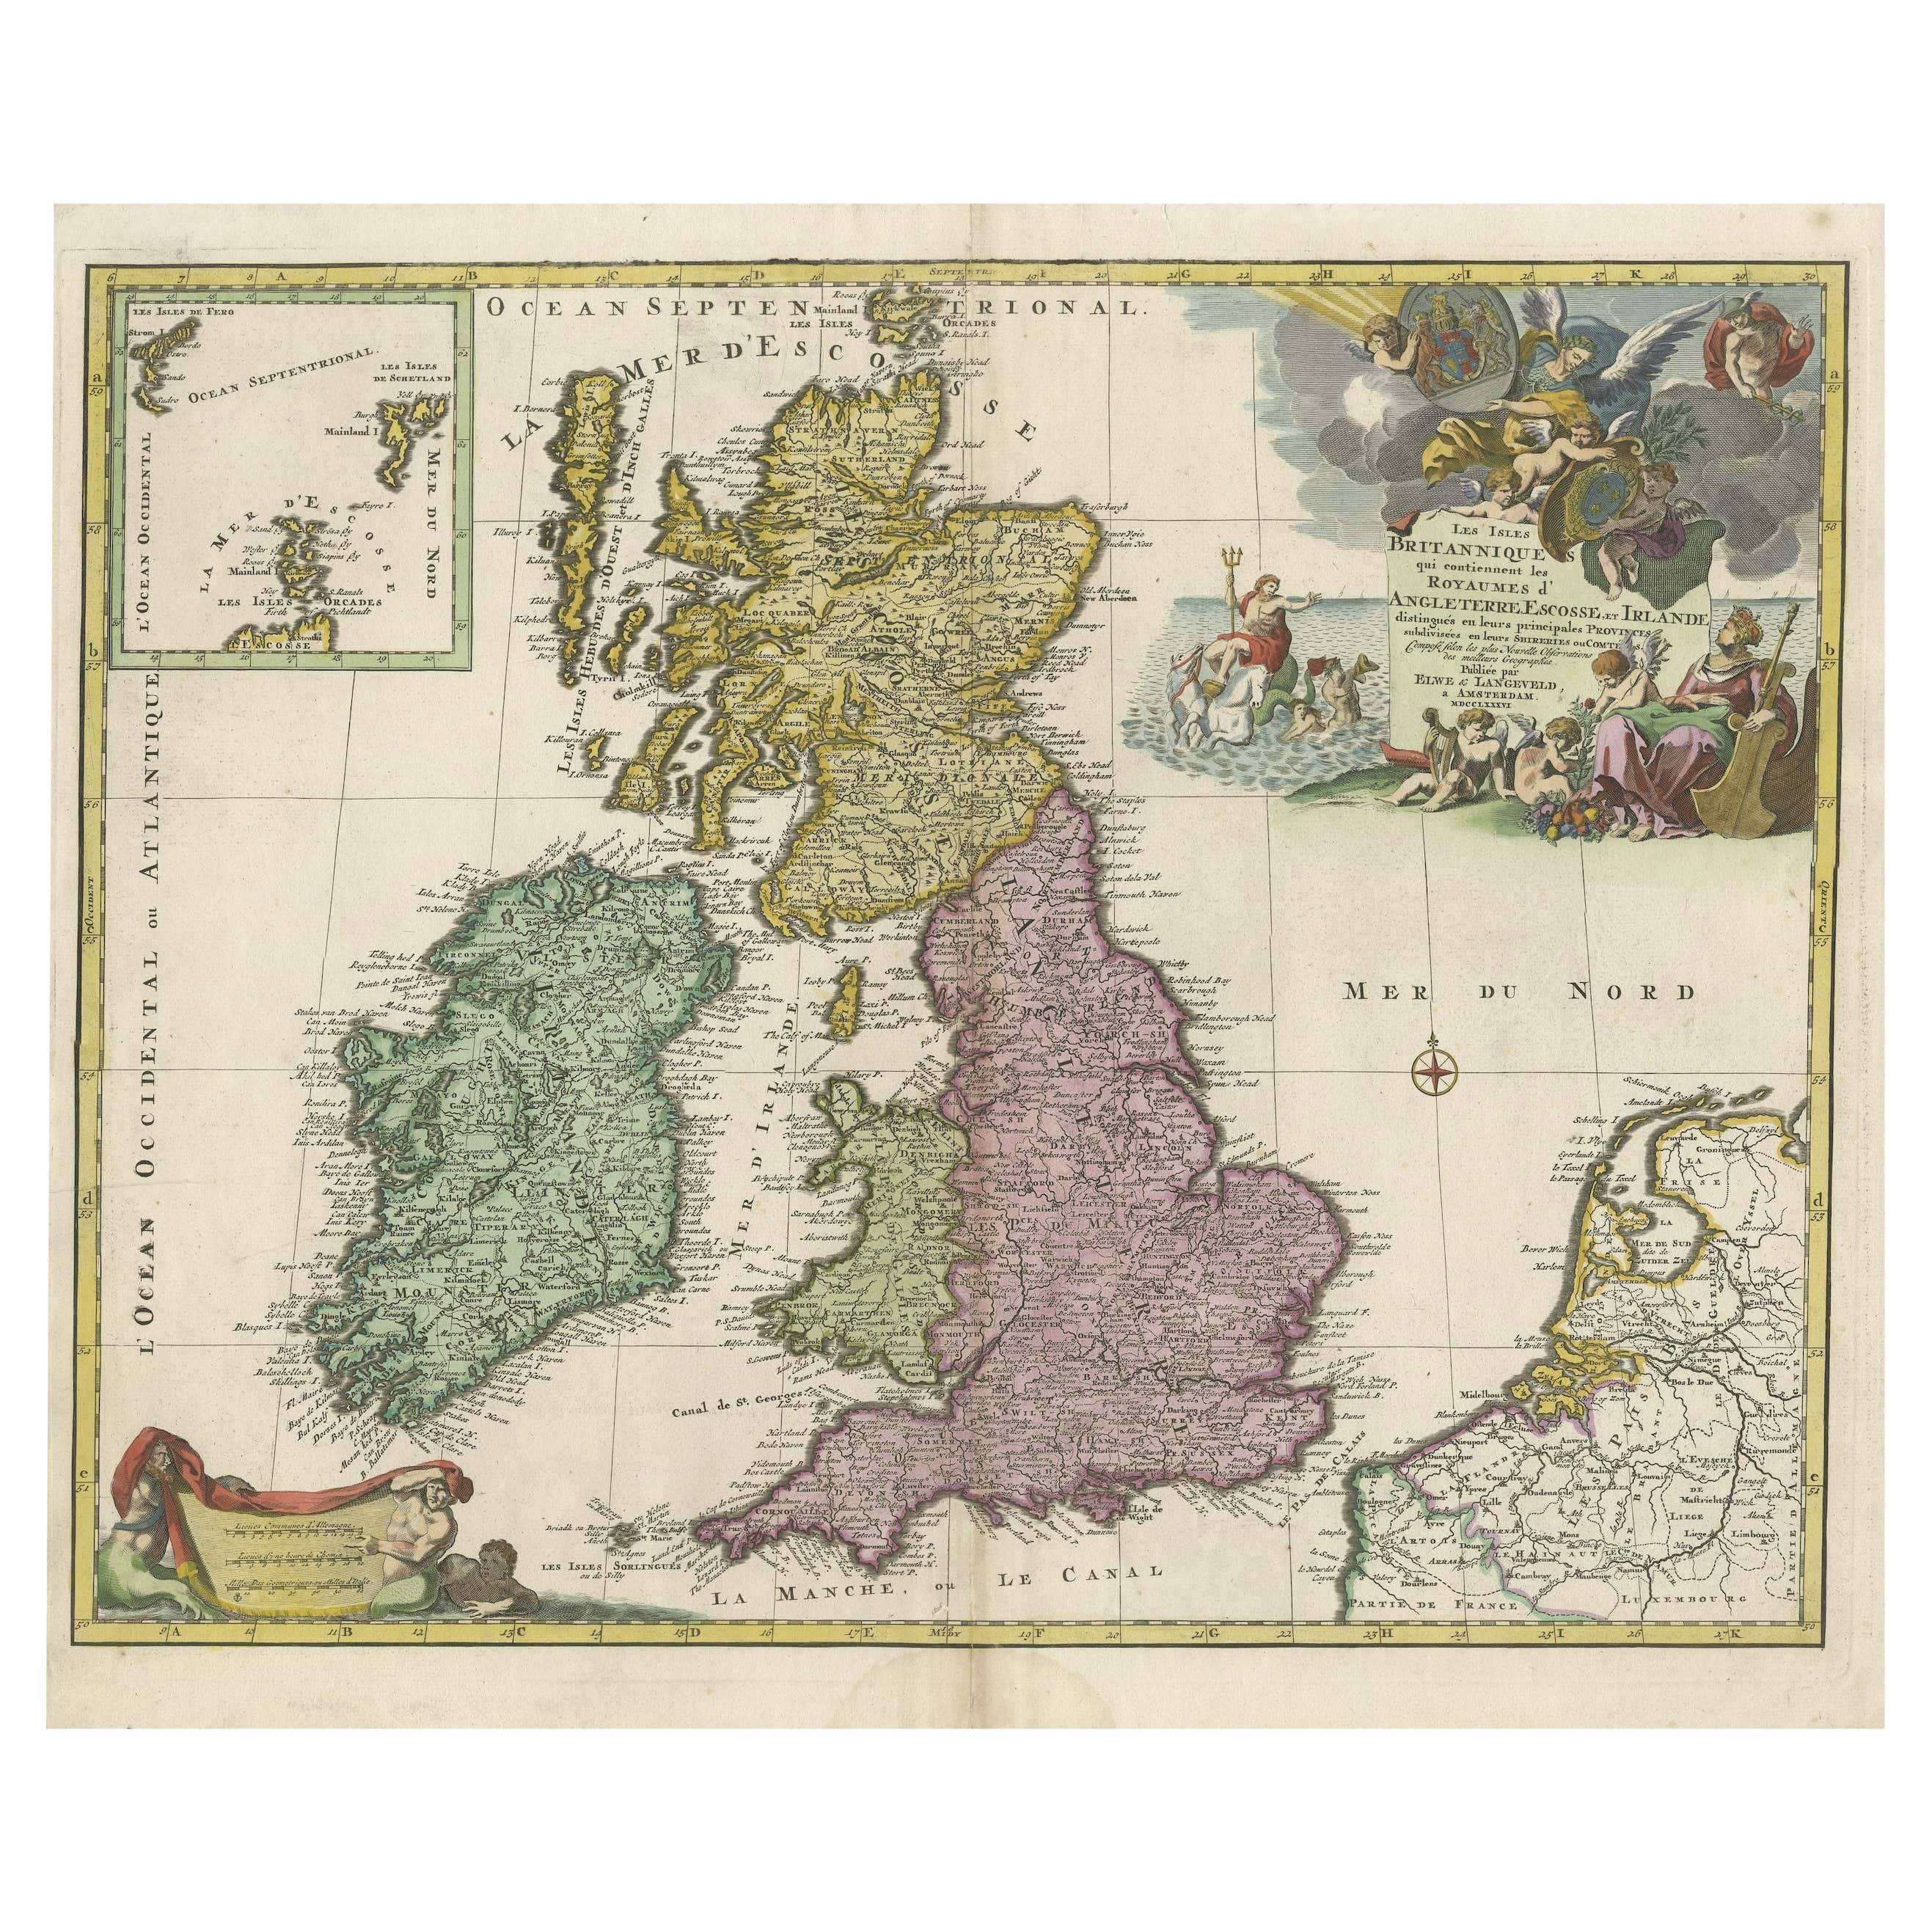 Old Map of the UK & Ireland, Insets of Orkney, Shetland and Faroe Islands, 1786